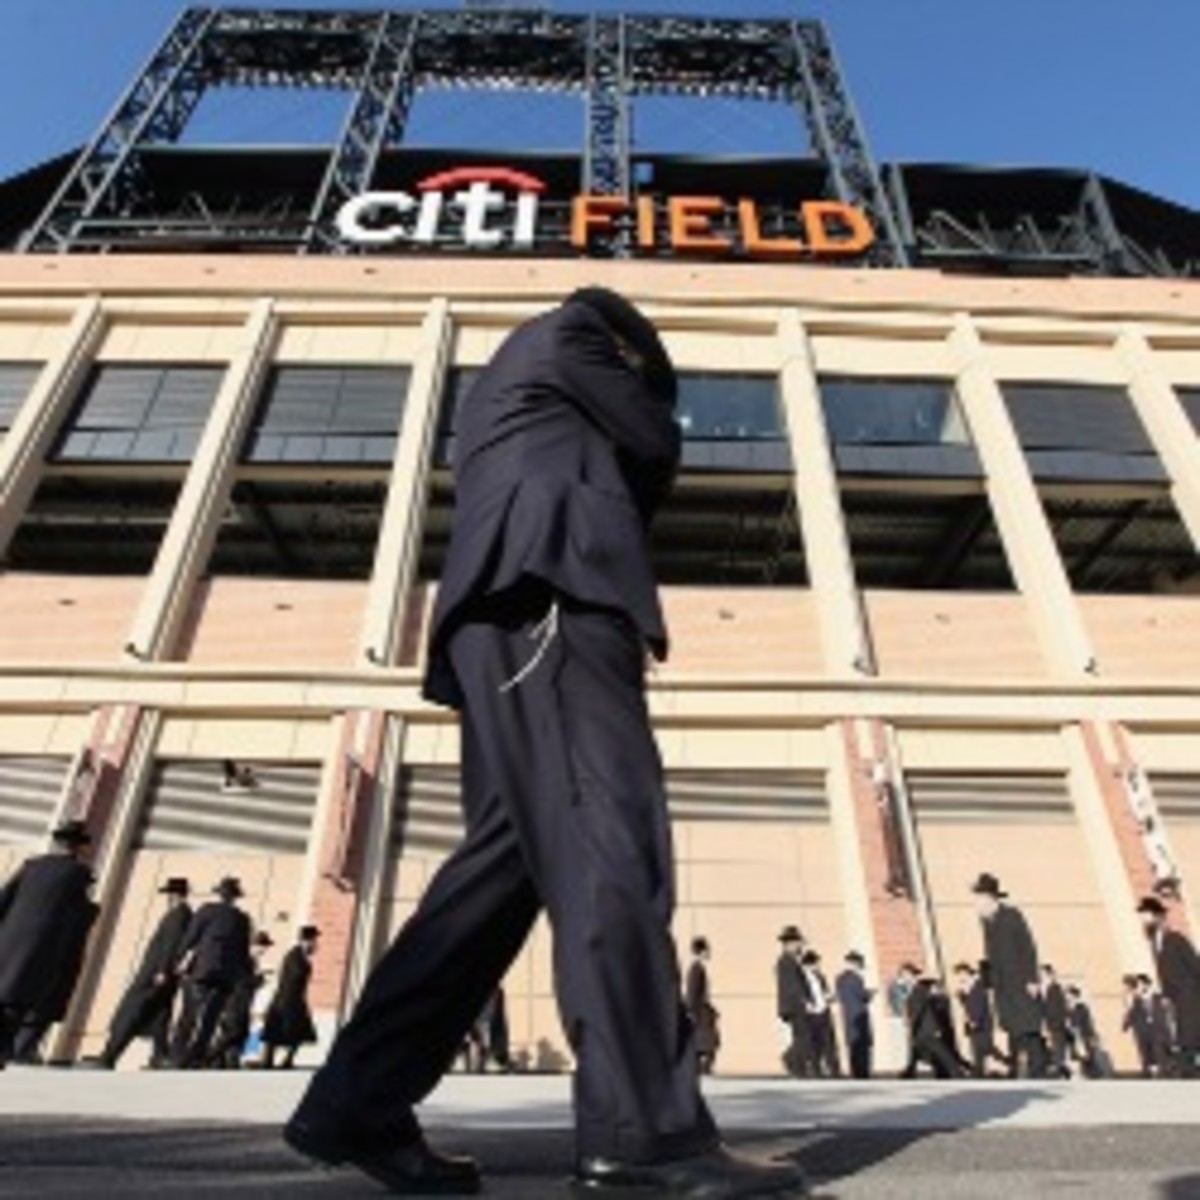 The Mets reportedly wanted to put a casino next to Citi Field. (Mario Tama/Getty Images)